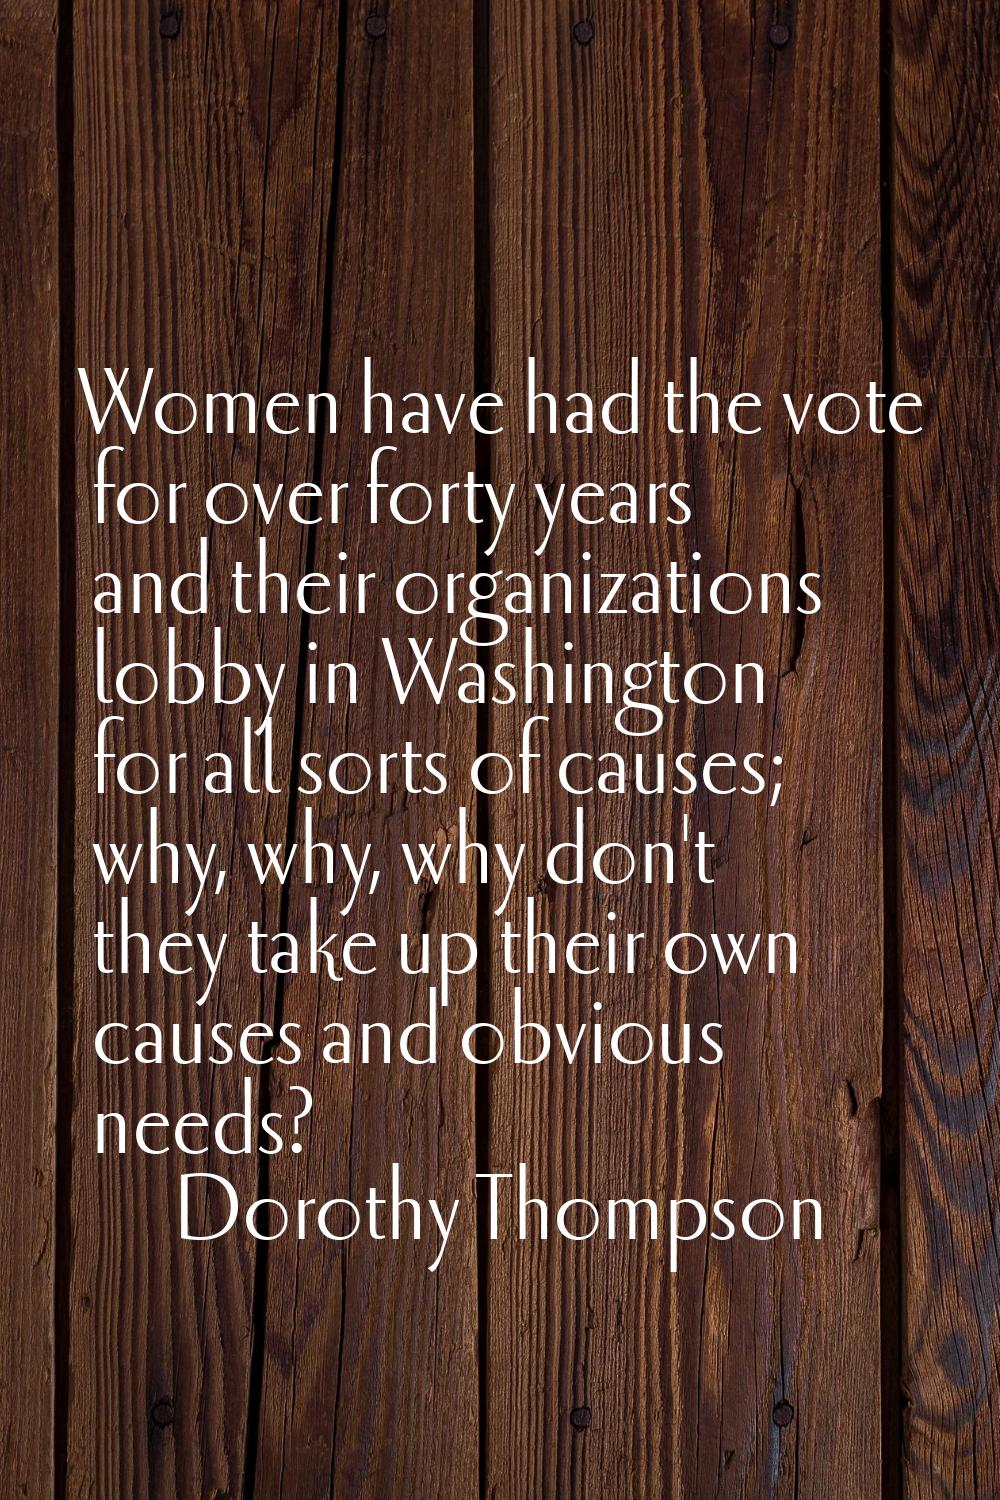 Women have had the vote for over forty years and their organizations lobby in Washington for all so